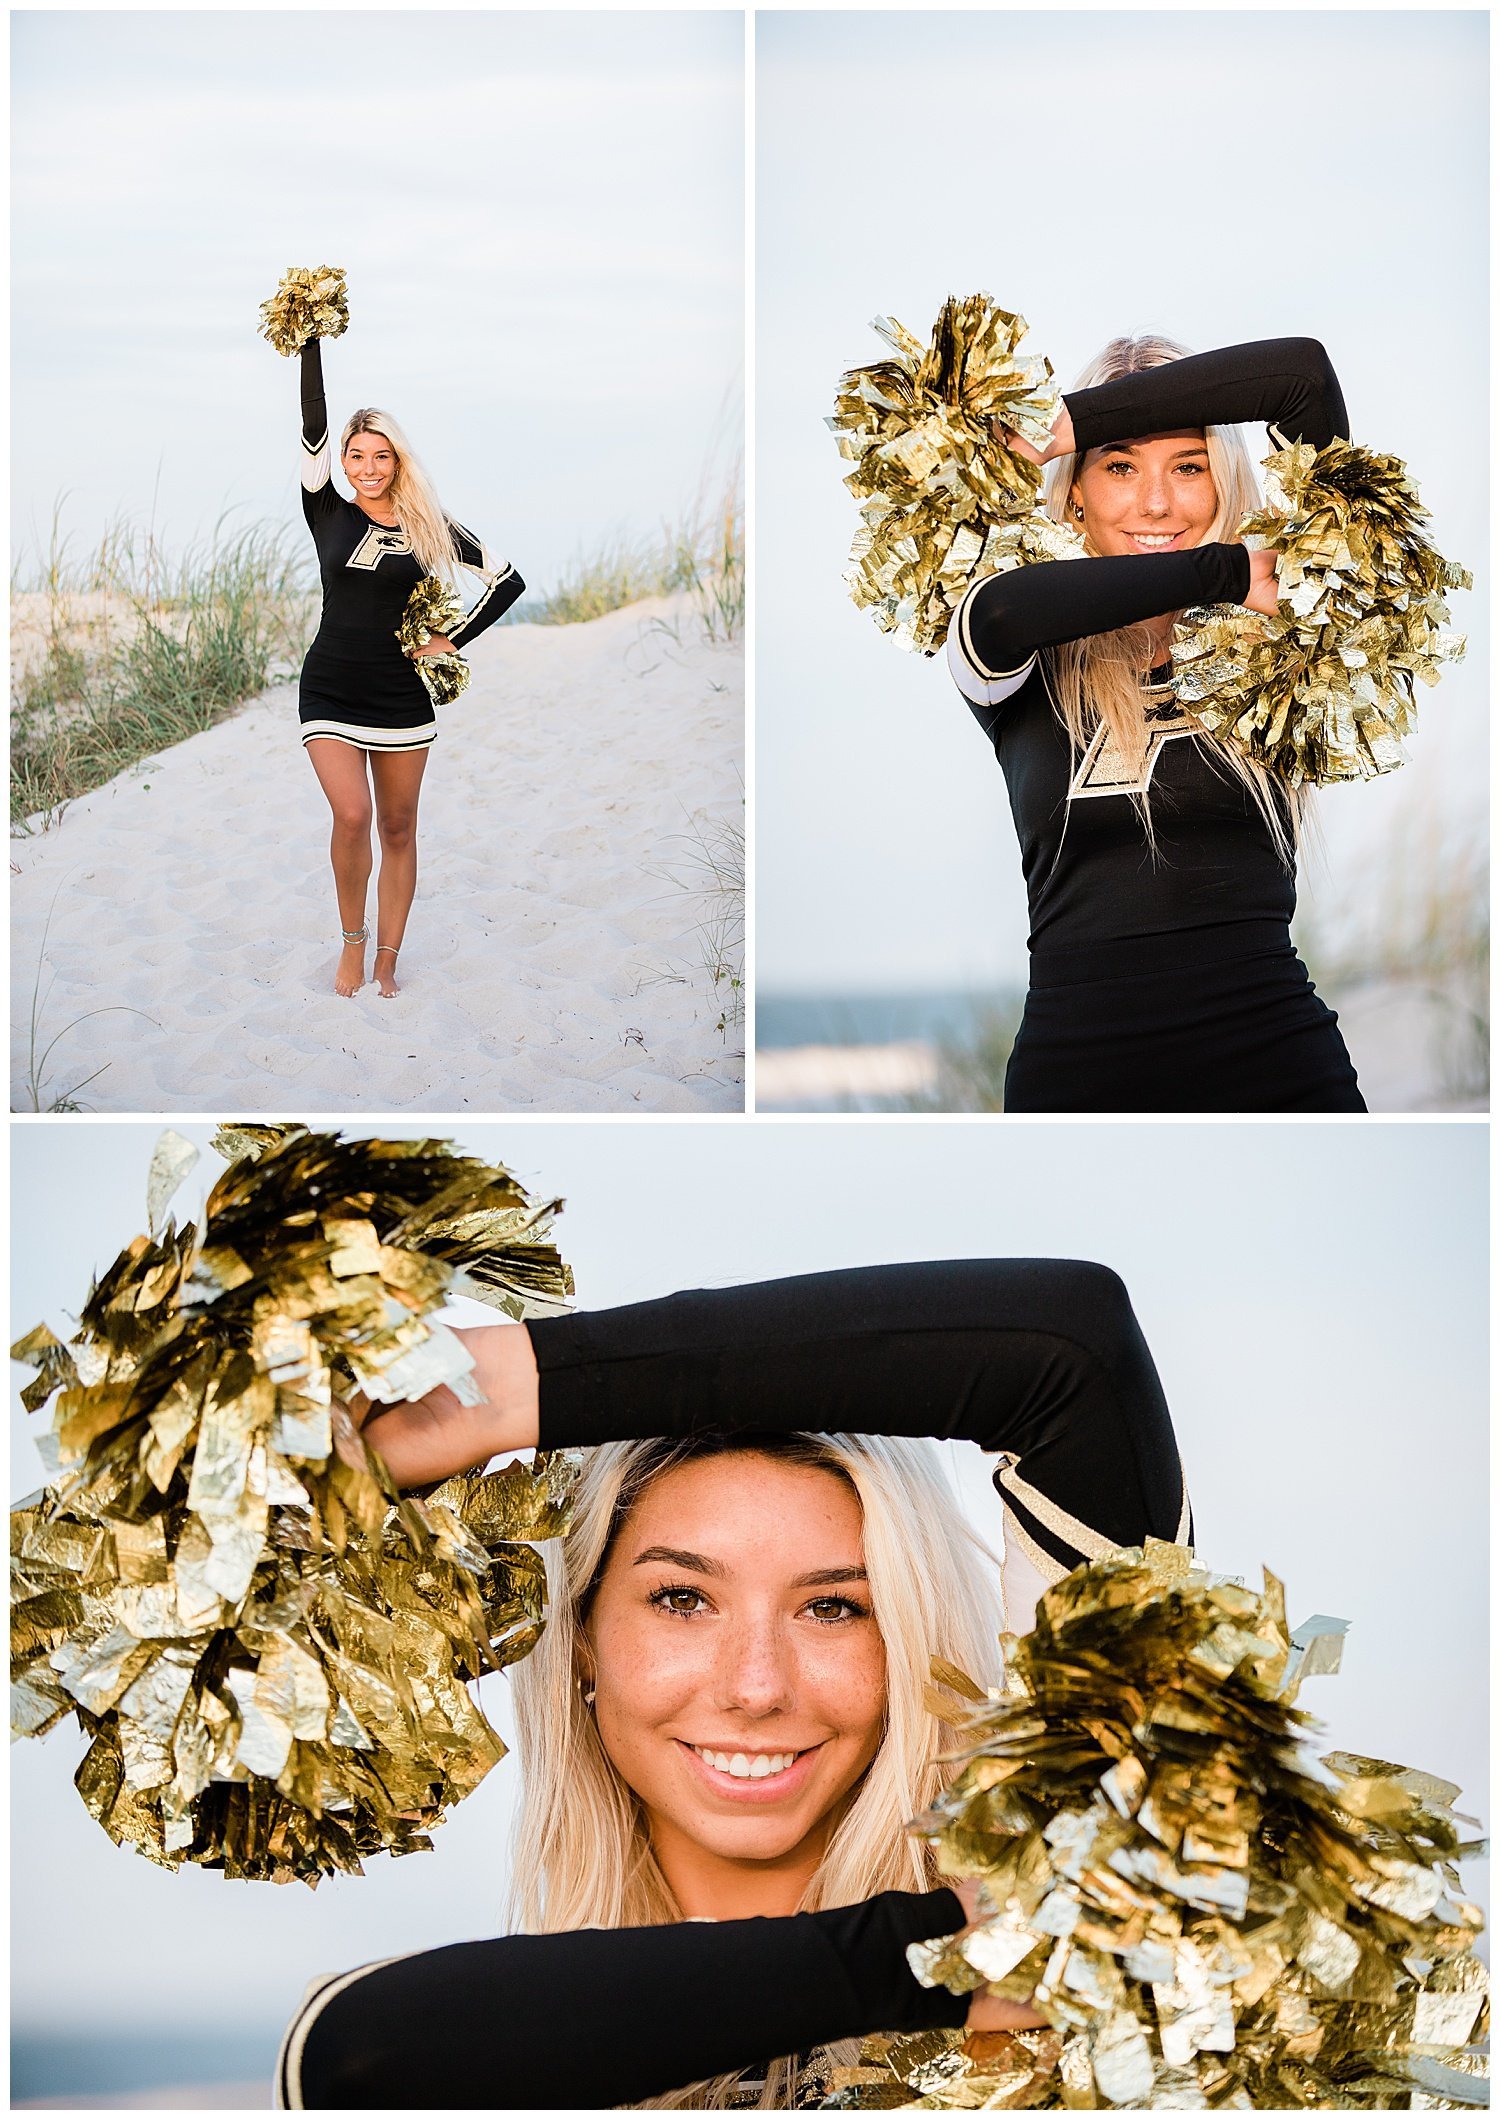 cheerleading outfit and posing inspiration for girls at the beach